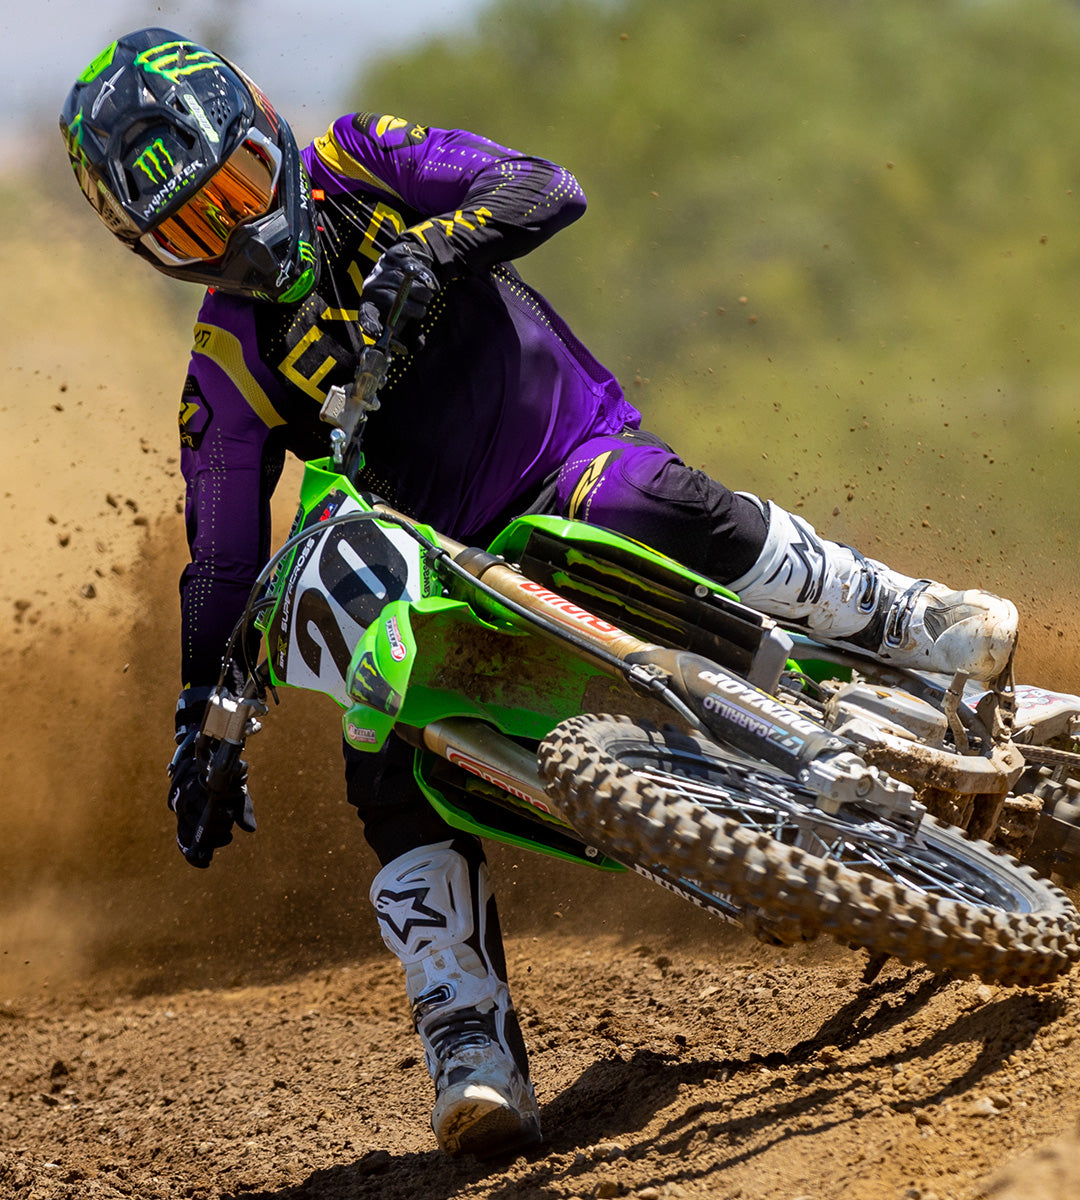 An image of a MX rider sporting the '24 Helium jersey and pant